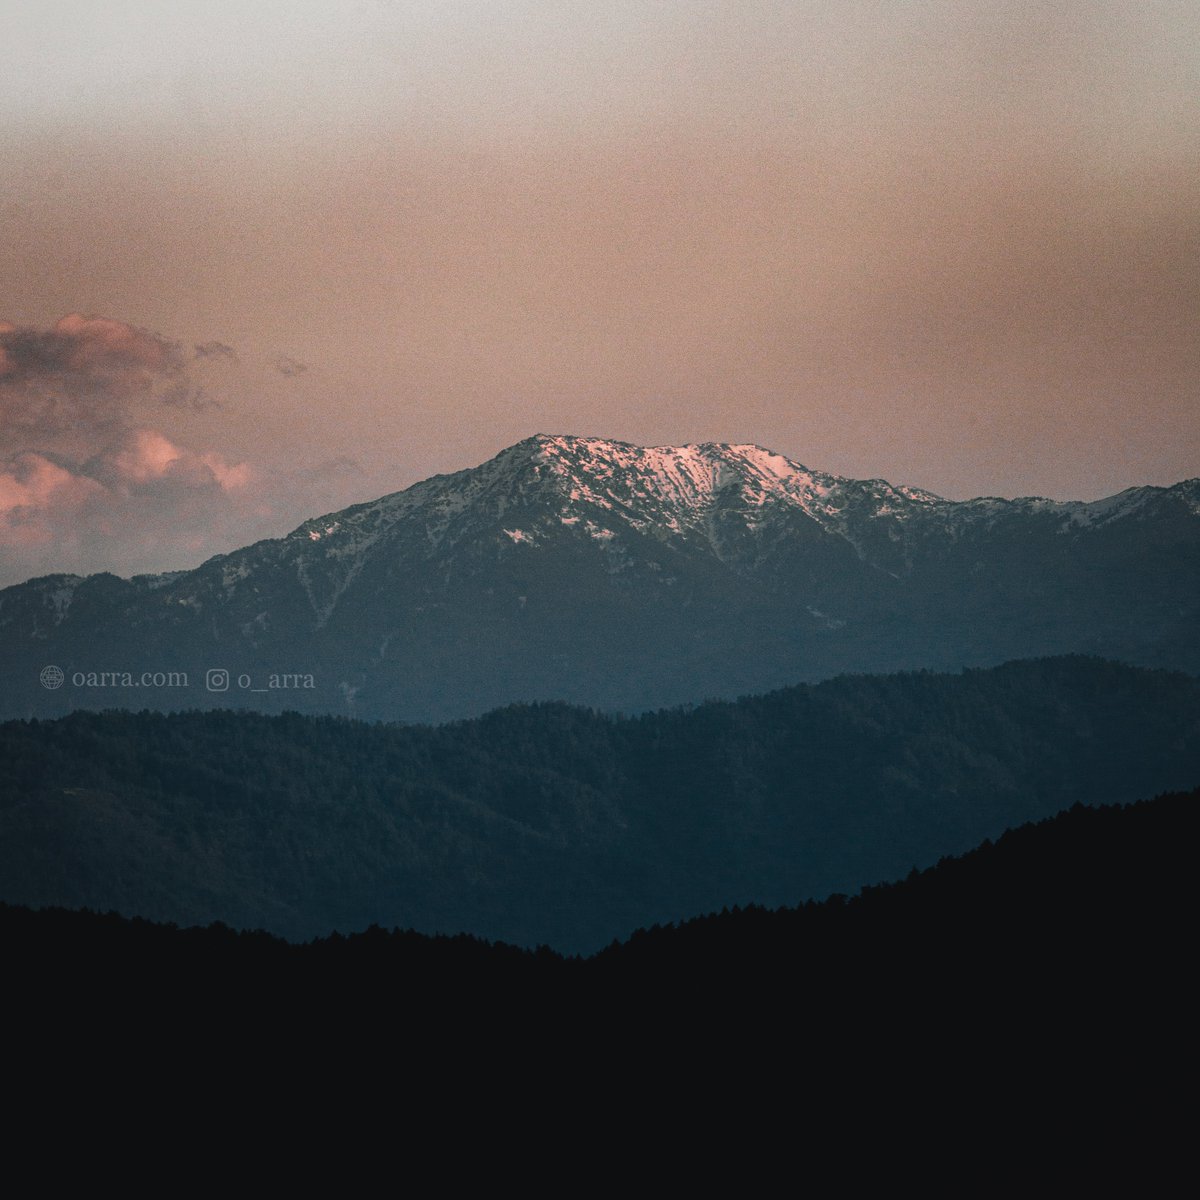 Can you guess the name of this peak?

oarra.com

#himachal #HimachalPradesh #snowcapped #peak #mountain #shimla #sirmour #sunset #photography #outdoors #photographer #photooftheday #himachaltourism #tourism #Travel #Unforgettablehimachal #oarra #IncredibleIndia